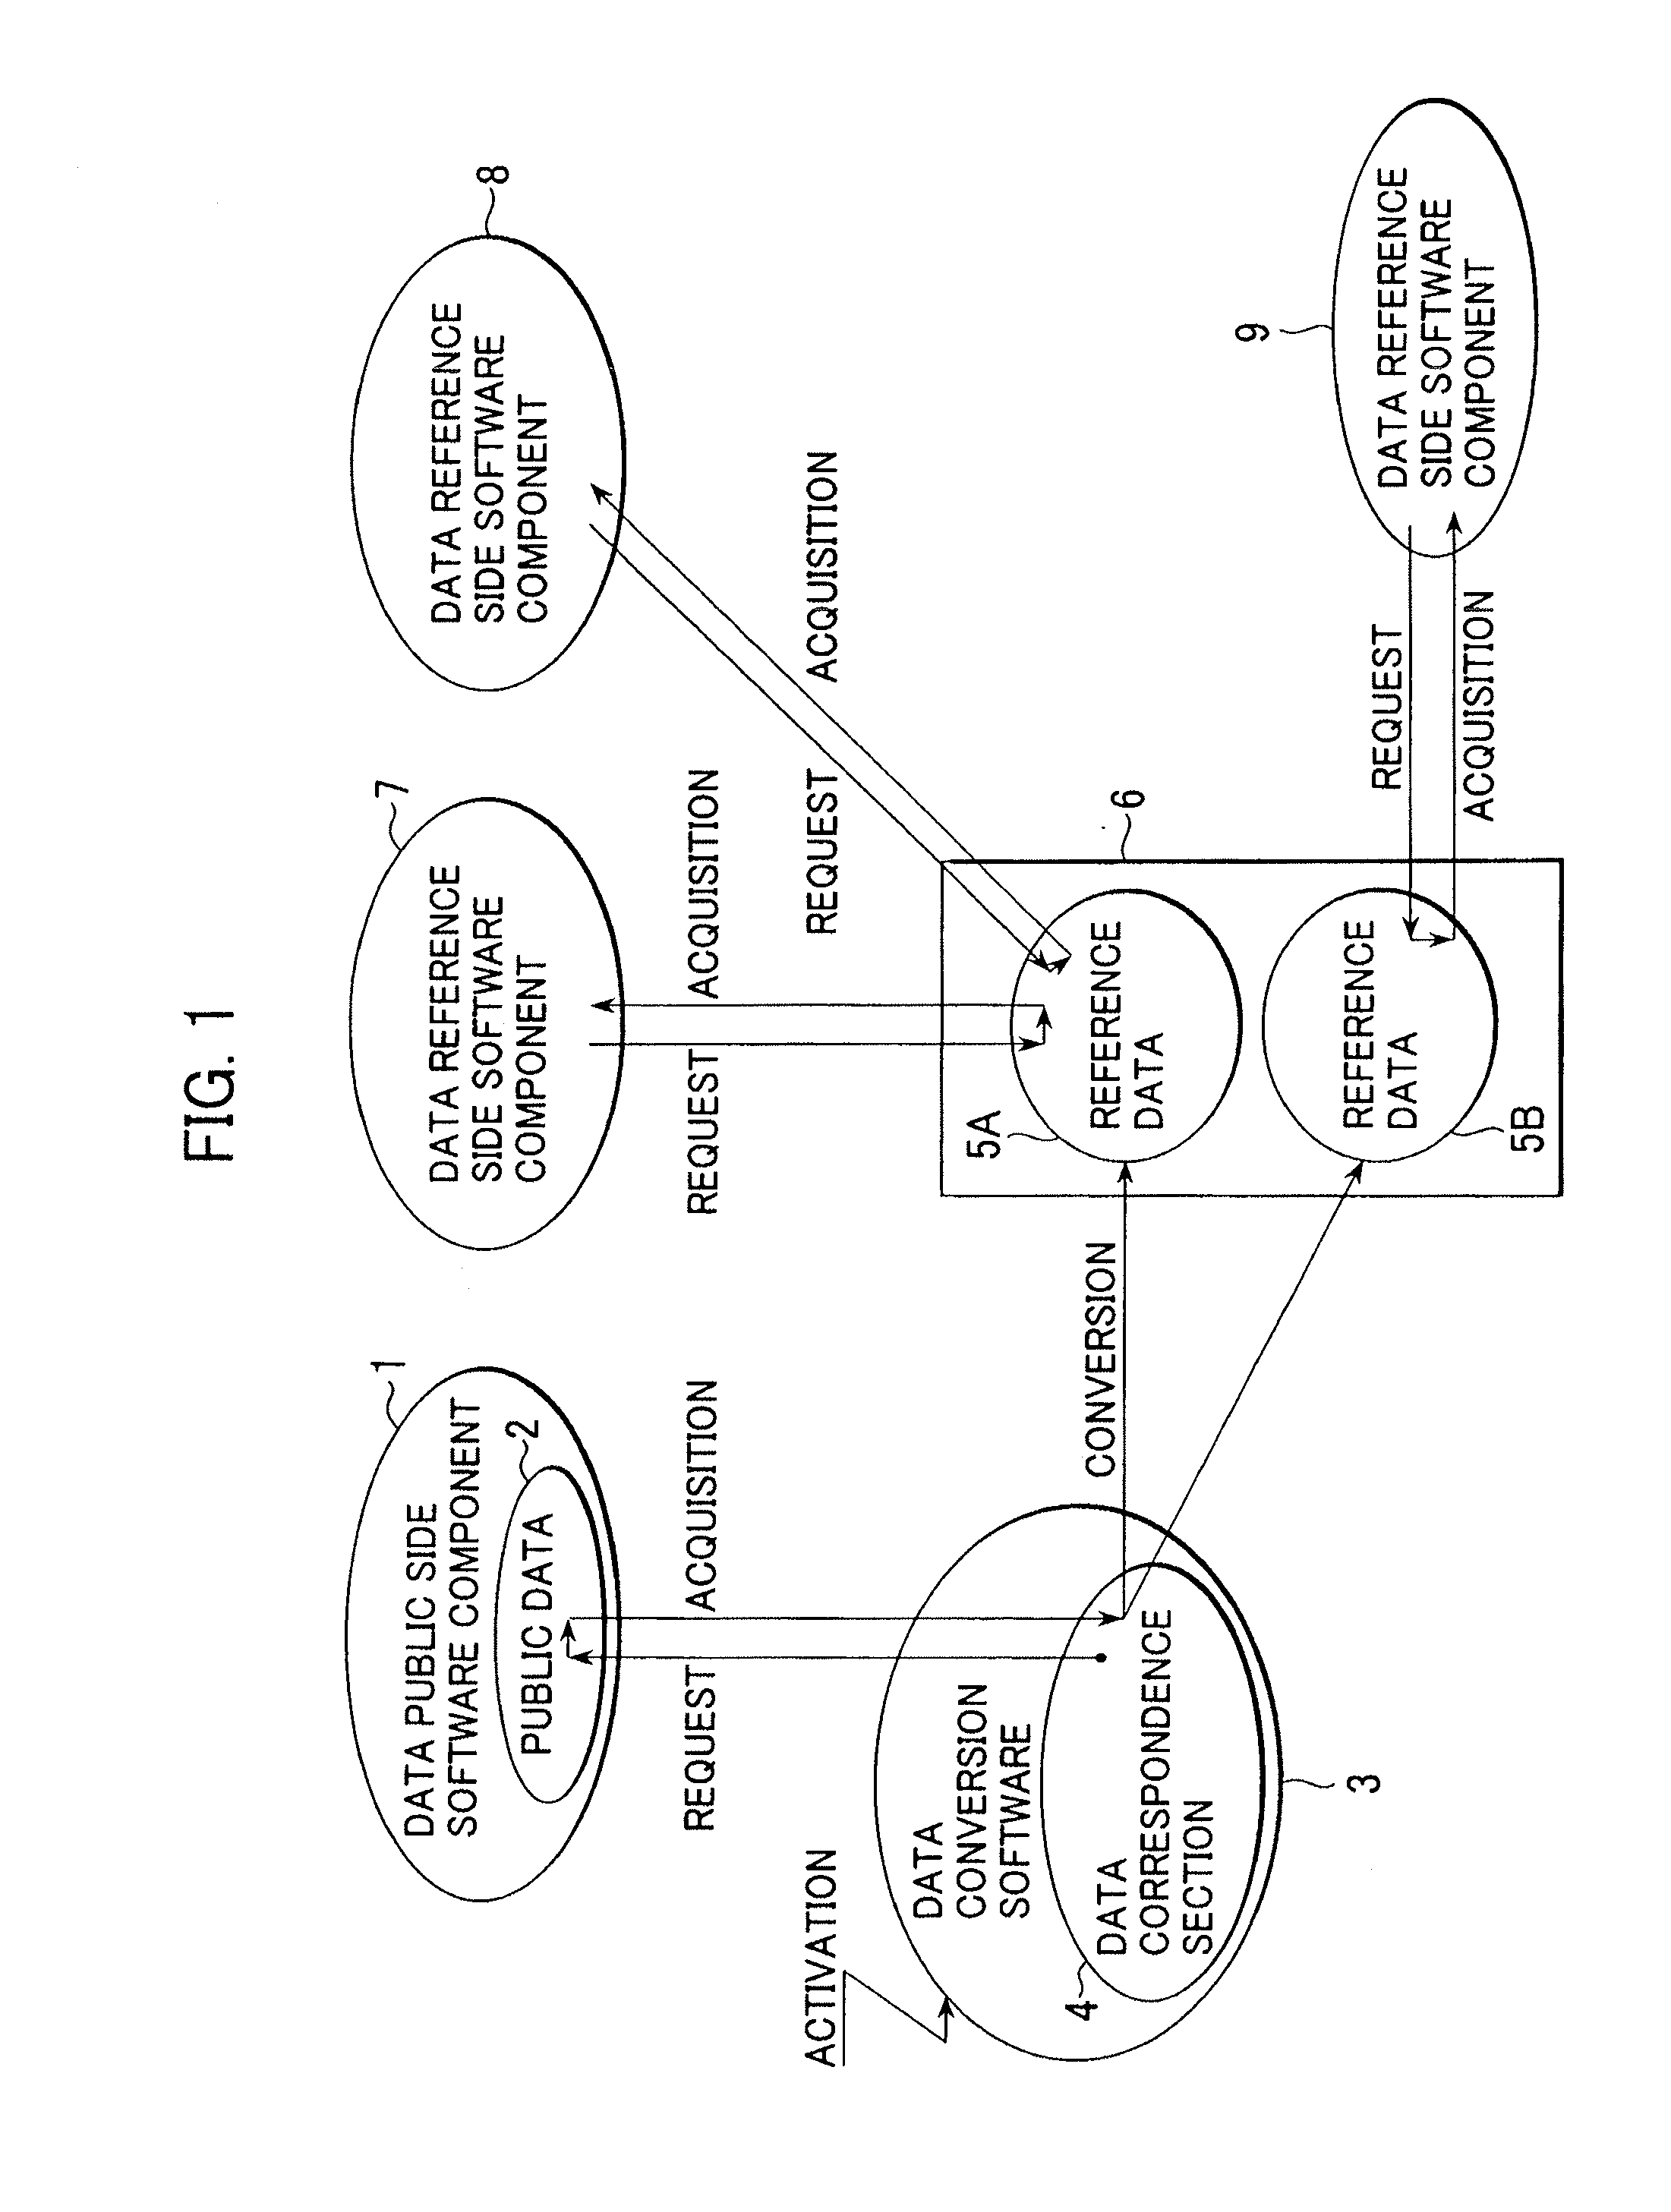 Vehicle Control Software and Vehicle Control Apparatus